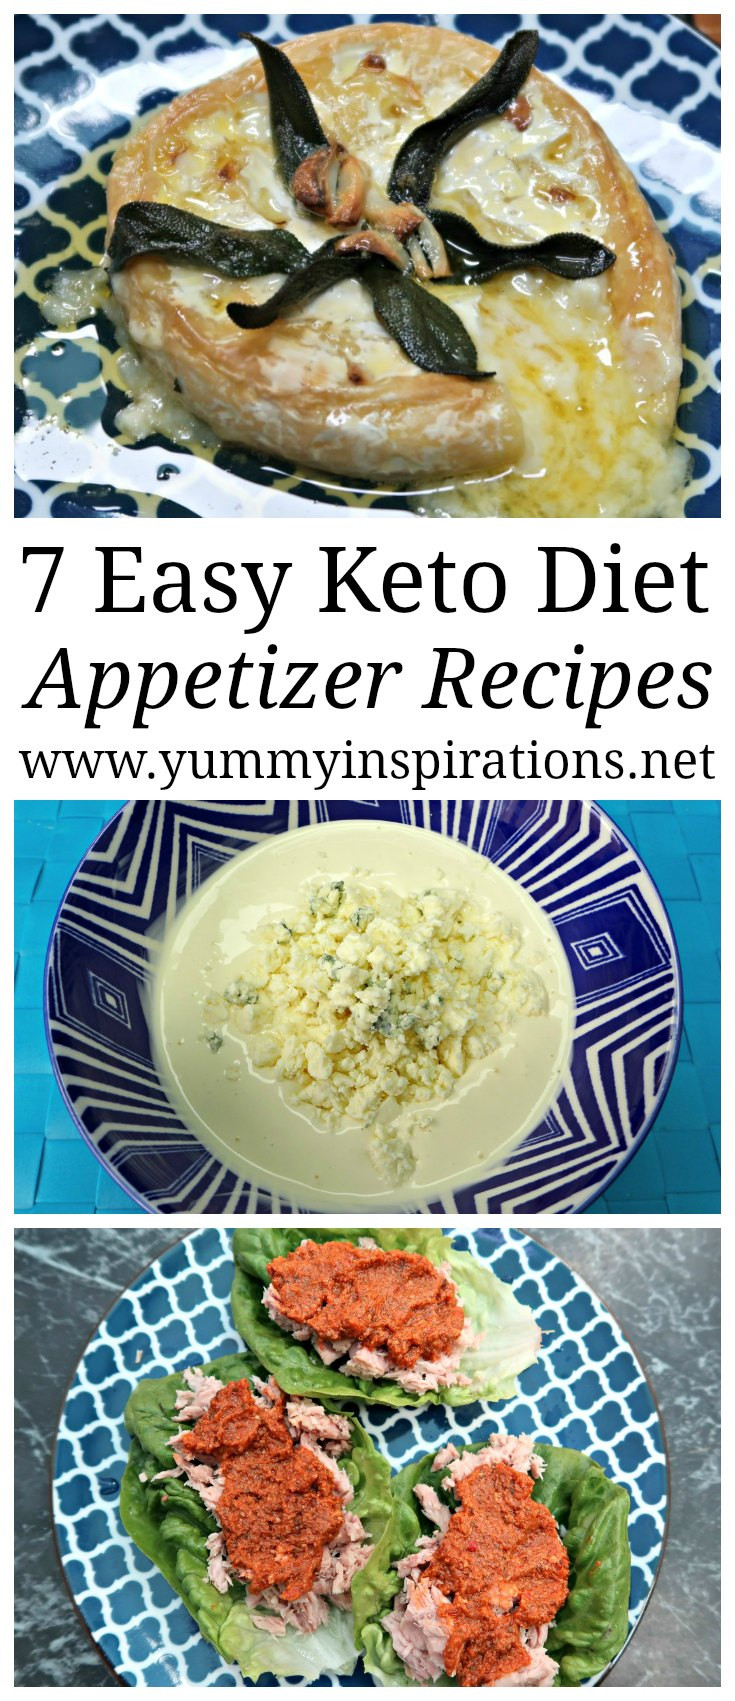 Keto Diet Appetizers
 7 Easy Keto Appetizers Recipes Simple Low Carb Appetizer